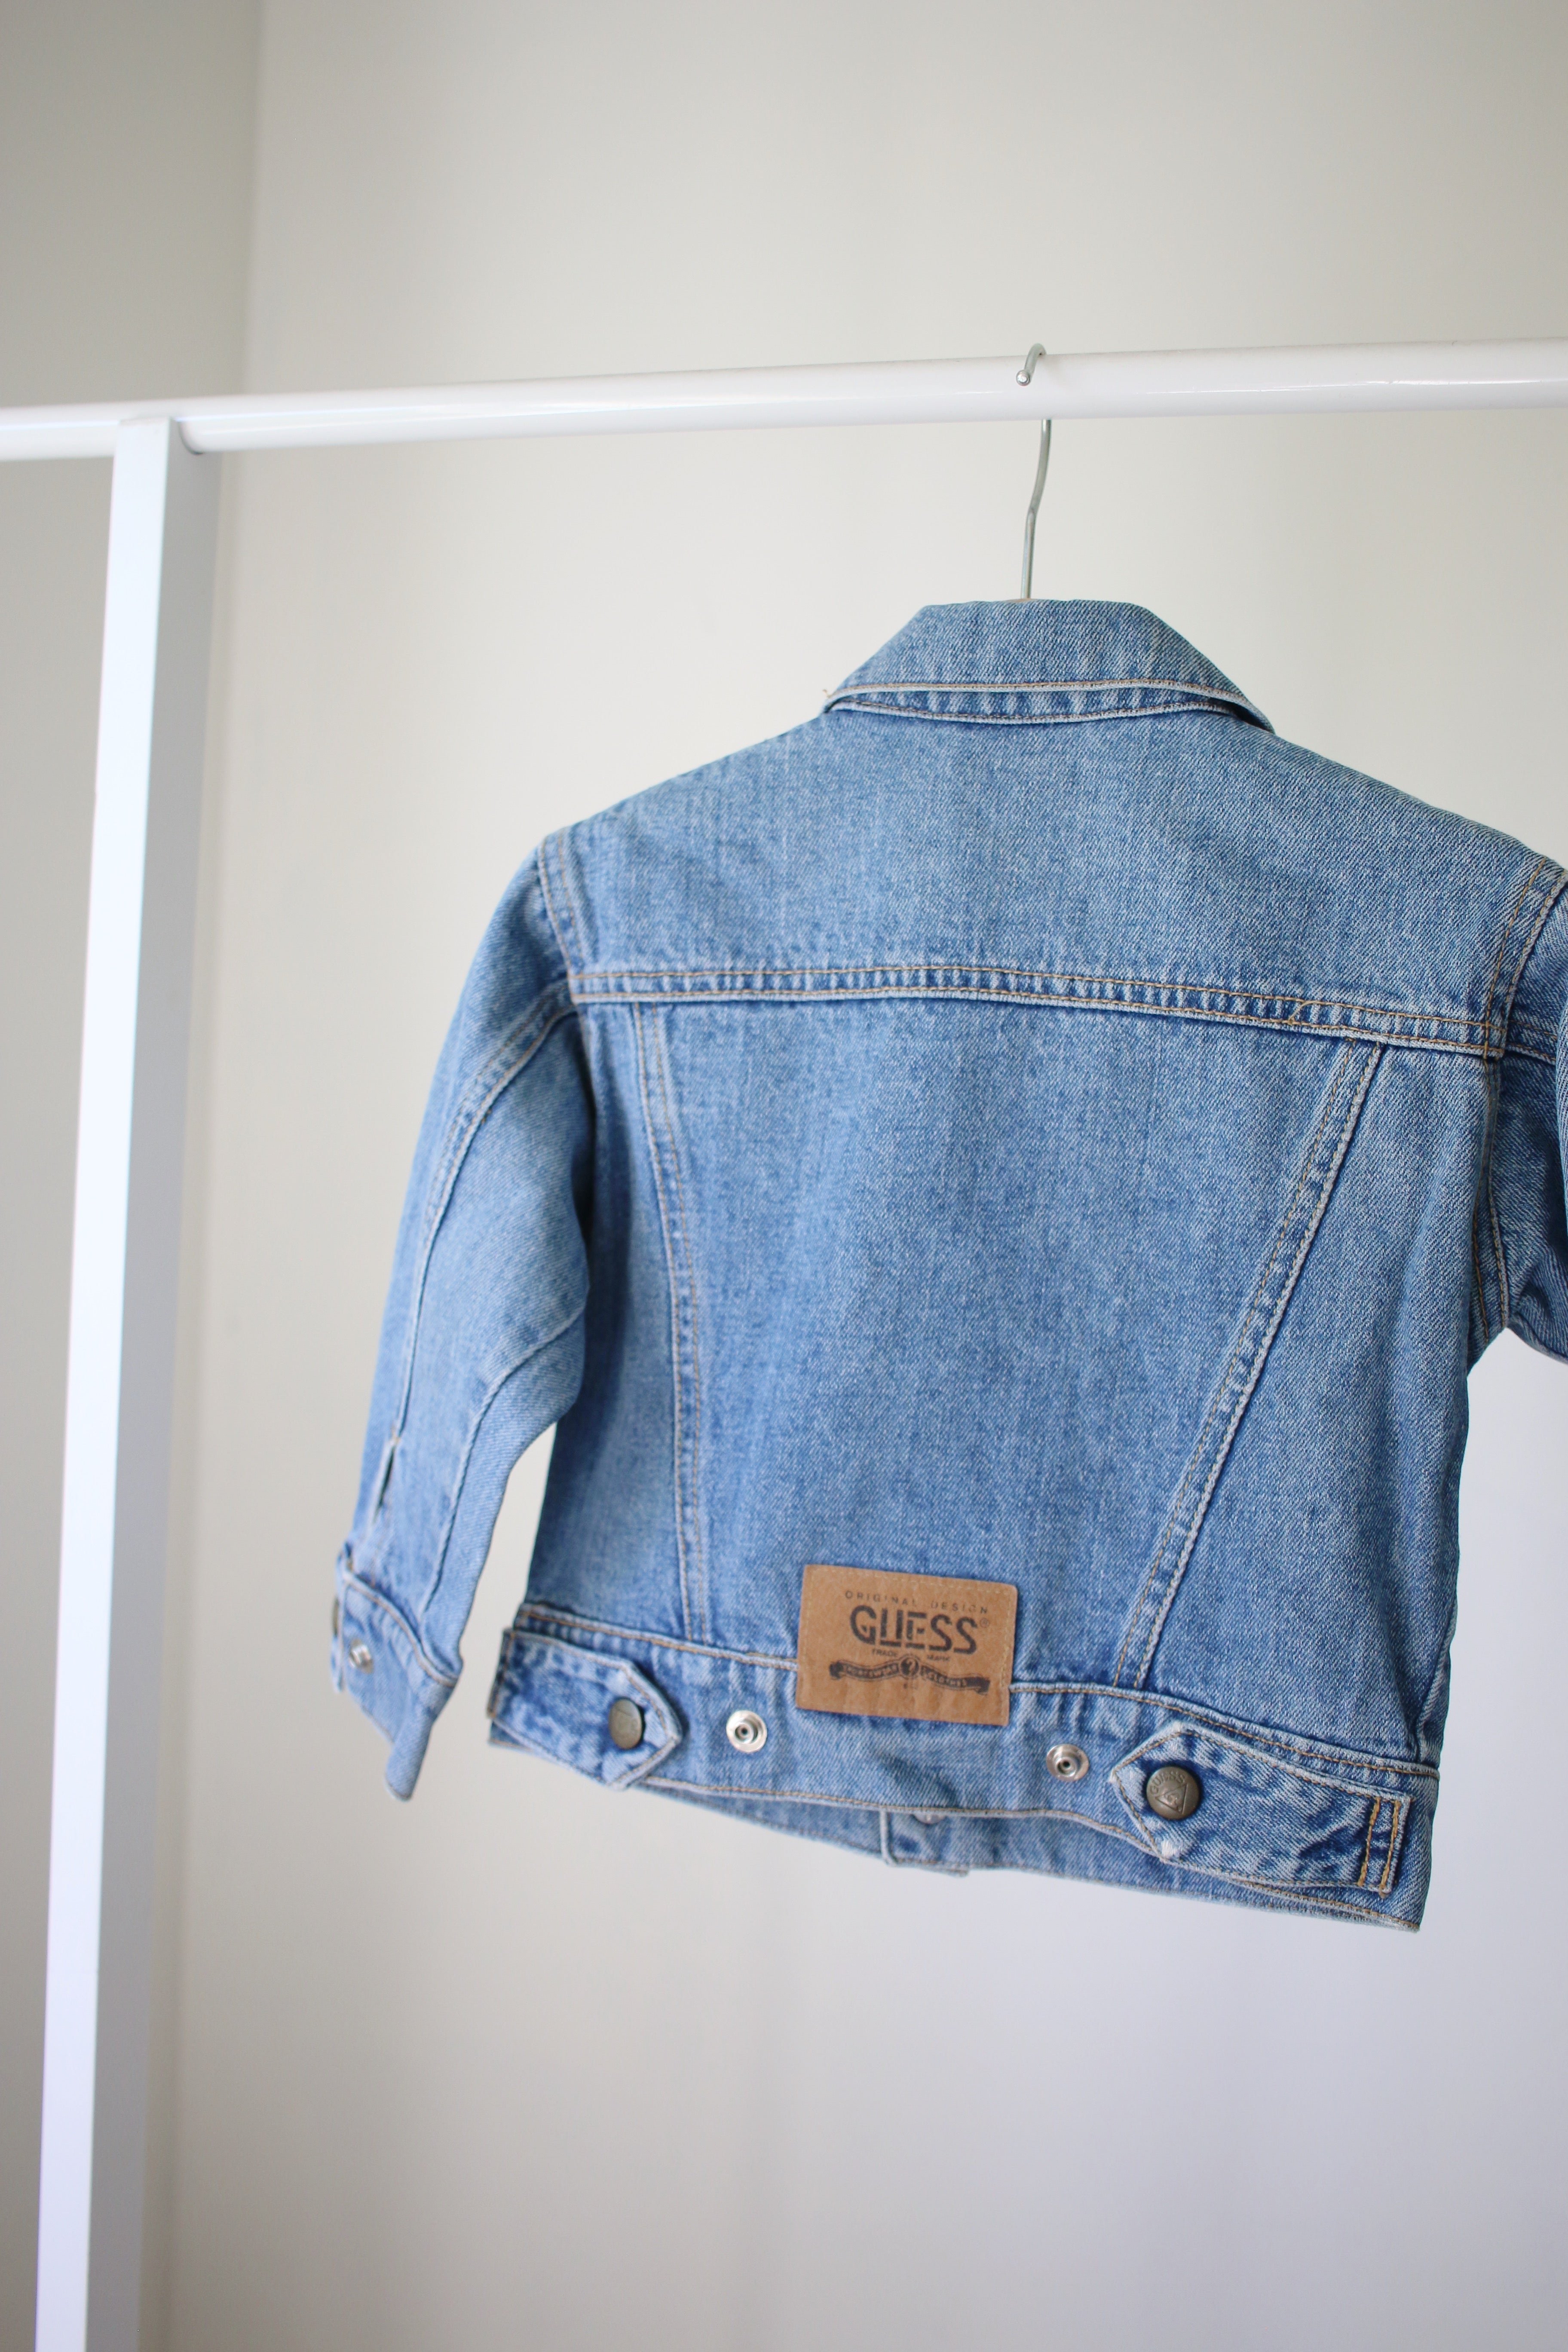 Vintage Guess denim jacket - size 12-24 months - made in USA